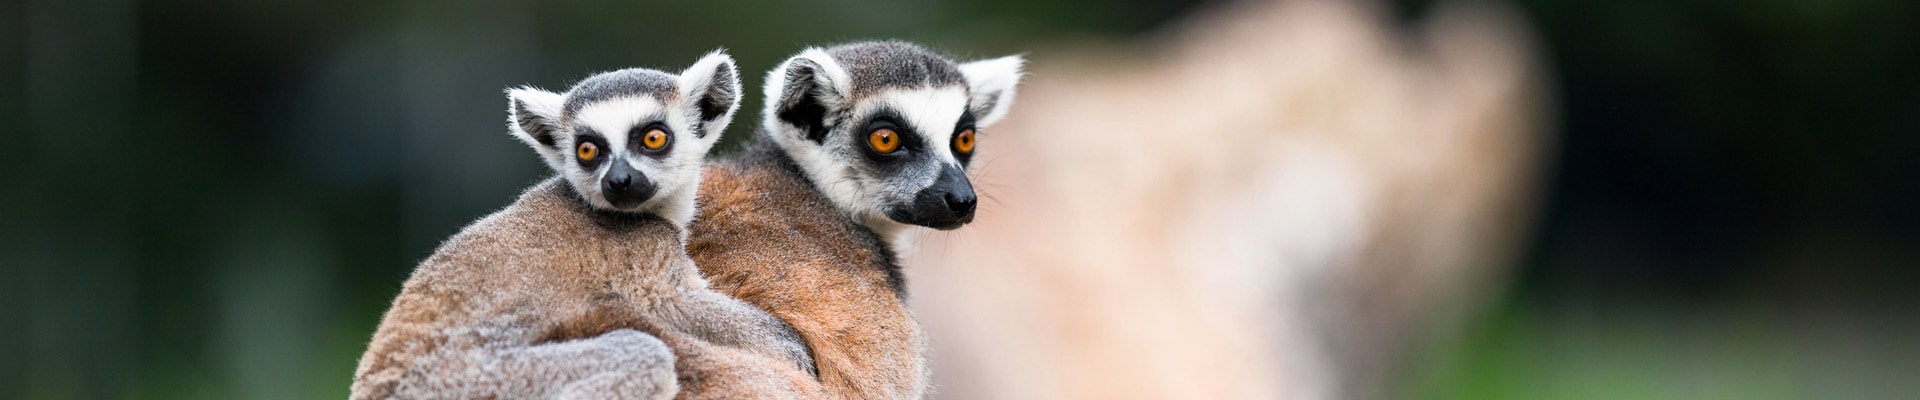 Banner image featuring two lemurs